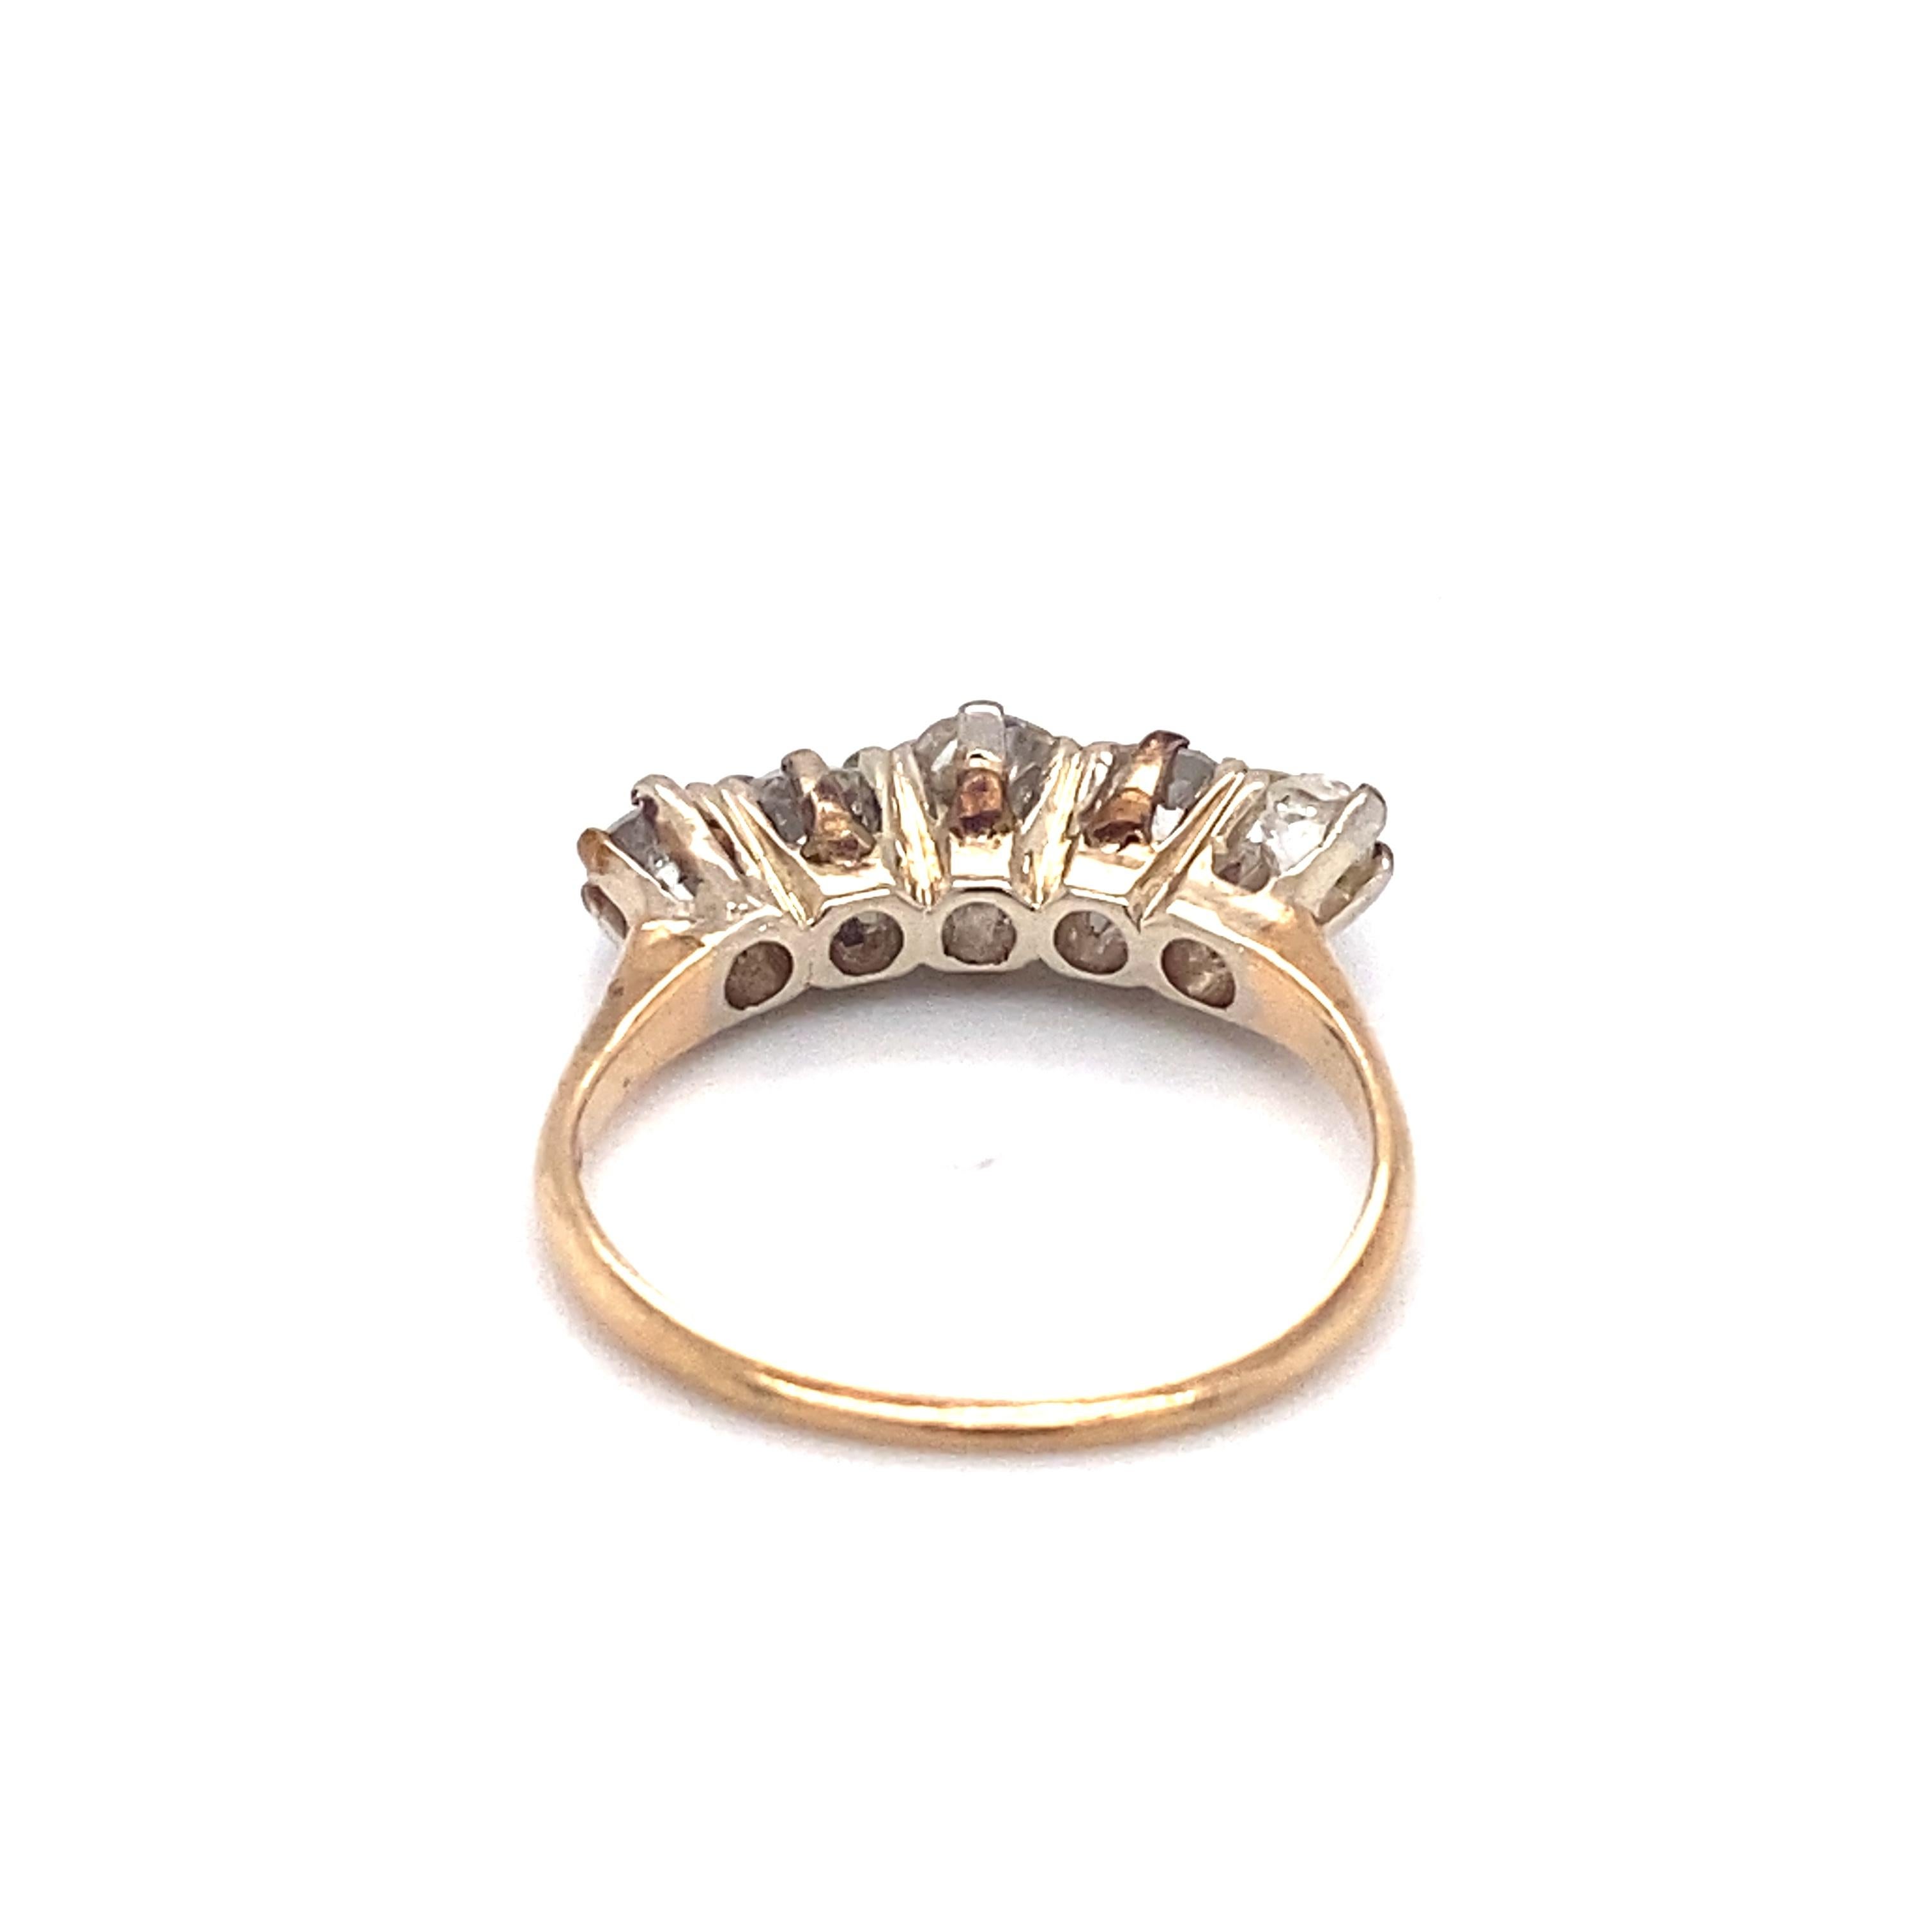 Item Details:
Ring Size: 5.5
Metal Type: 14k Yellow Gold
Weight: 2.7 grams

Diamond Details:
Shape : Old Mine - Old Cushion Brilliant
Weight: 1.05cttw
Color: JK
Clarity: SI1-SI2